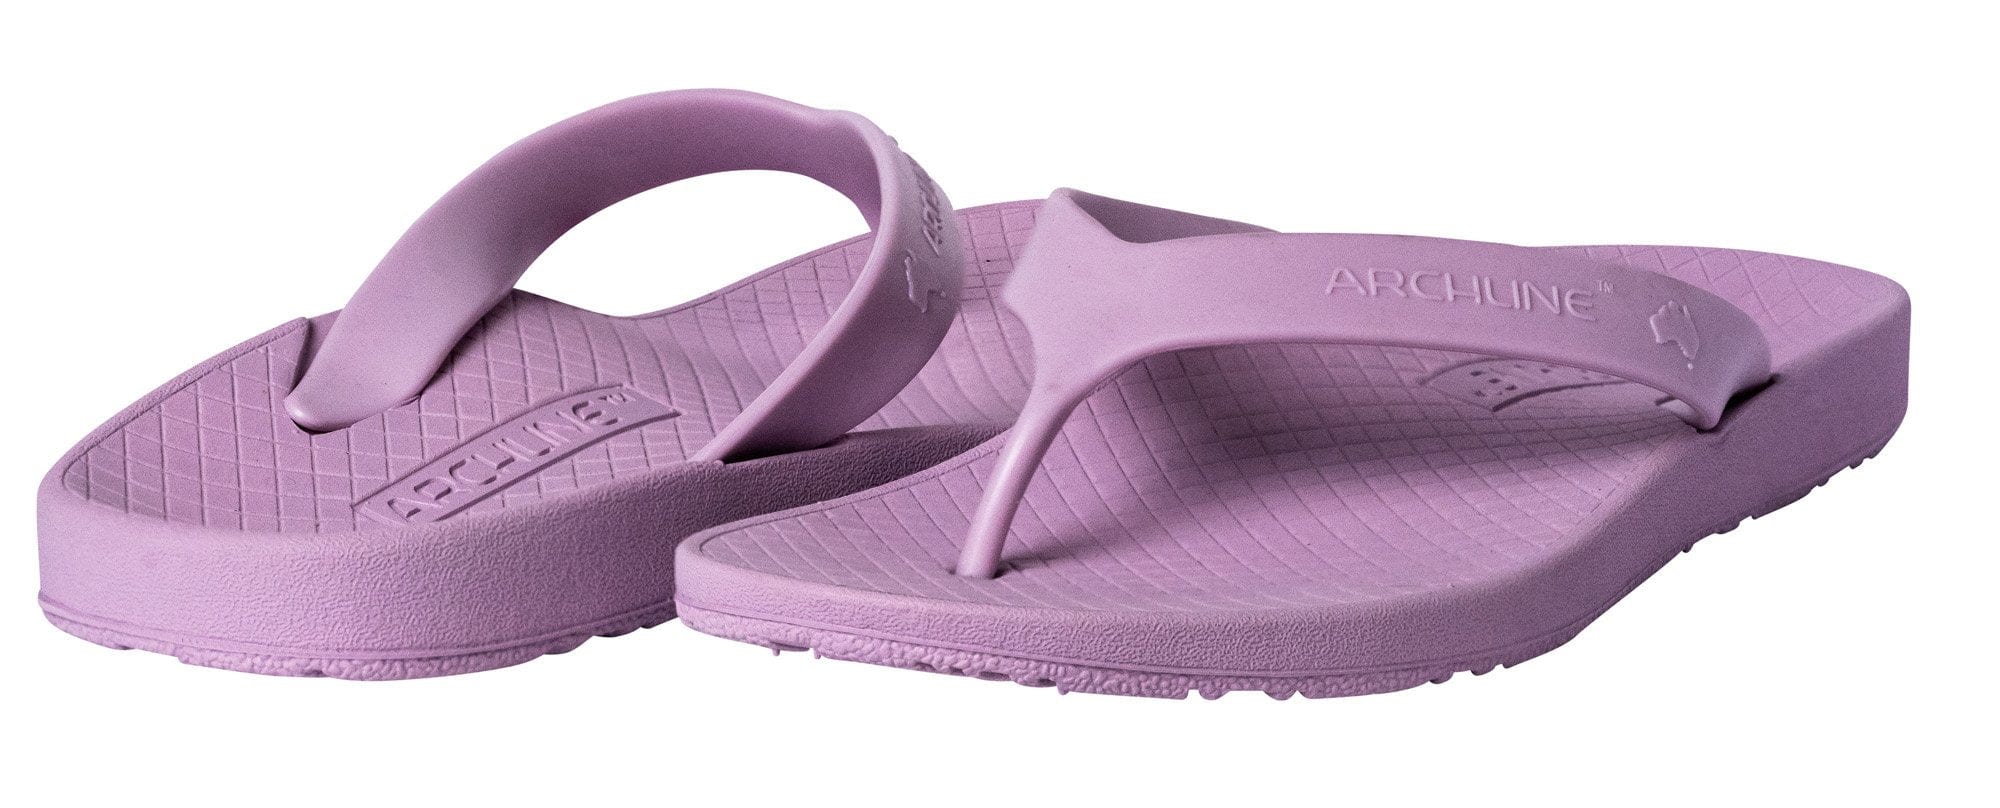 Foot HQ Footwear 40 Archline Orthotic Arch Support Flip Flop Thongs (Lilac Purple)